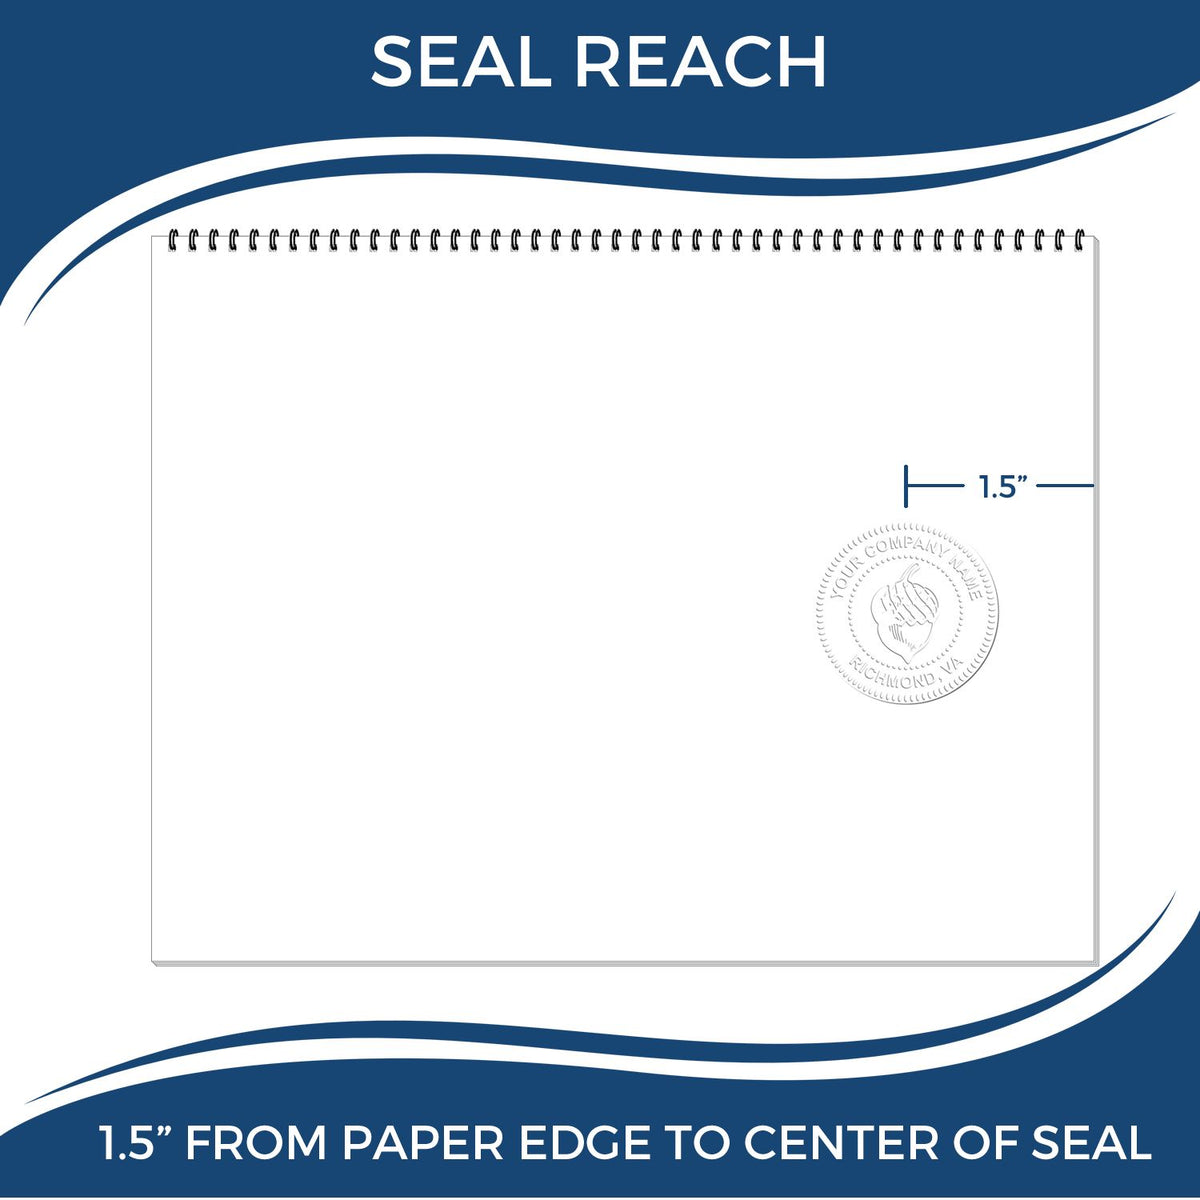 An infographic showing the seal reach which is represented by a ruler and a miniature seal image of the Handheld Kansas Land Surveyor Seal